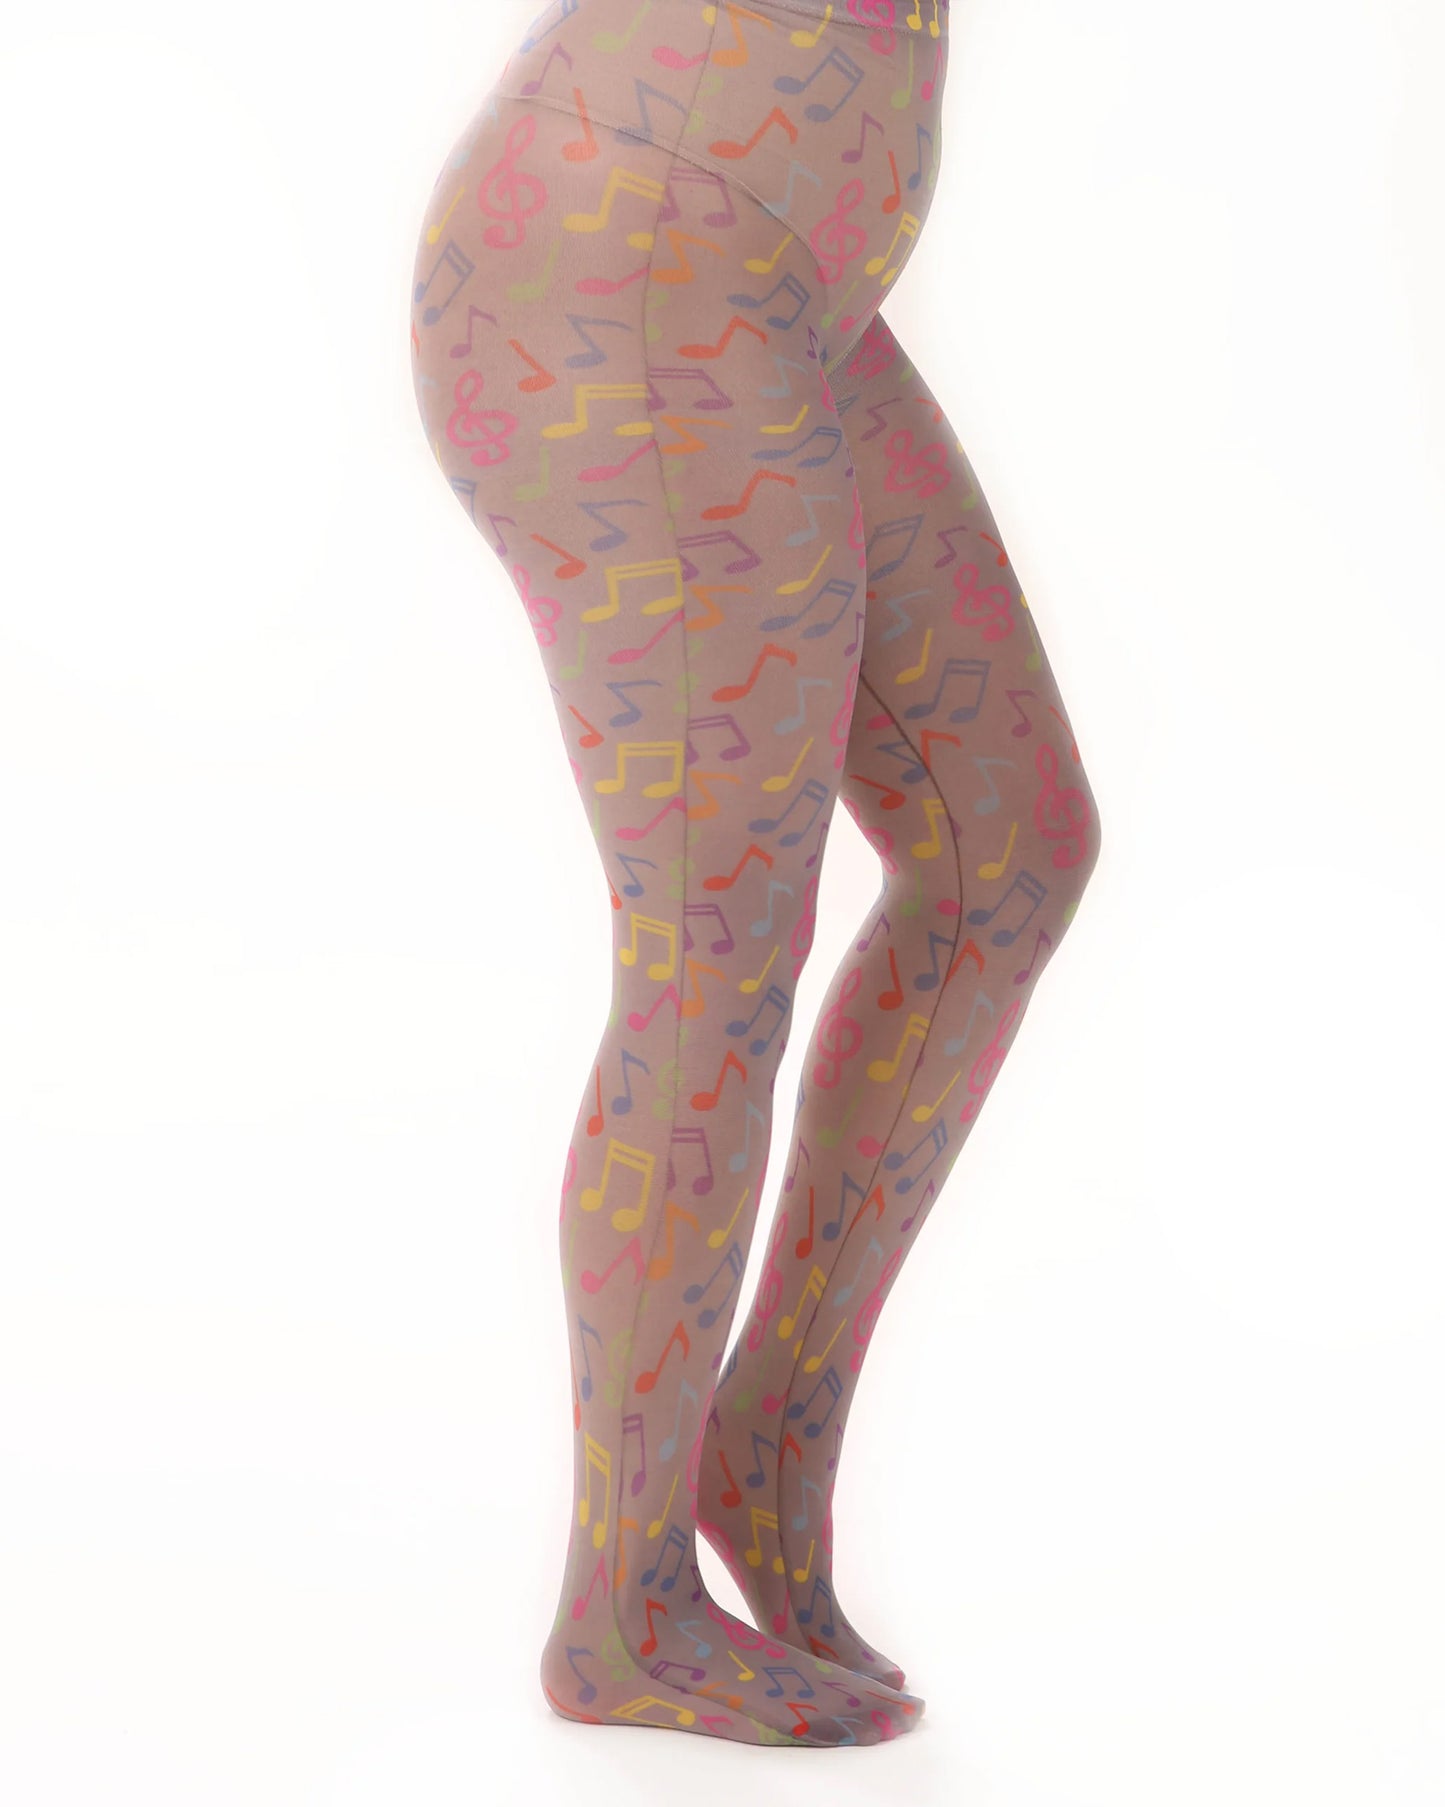 Pamela Mann Musical Notes Print Tights - Grey opaque tights with an all bright multicolured music notes print pattern. Side view.